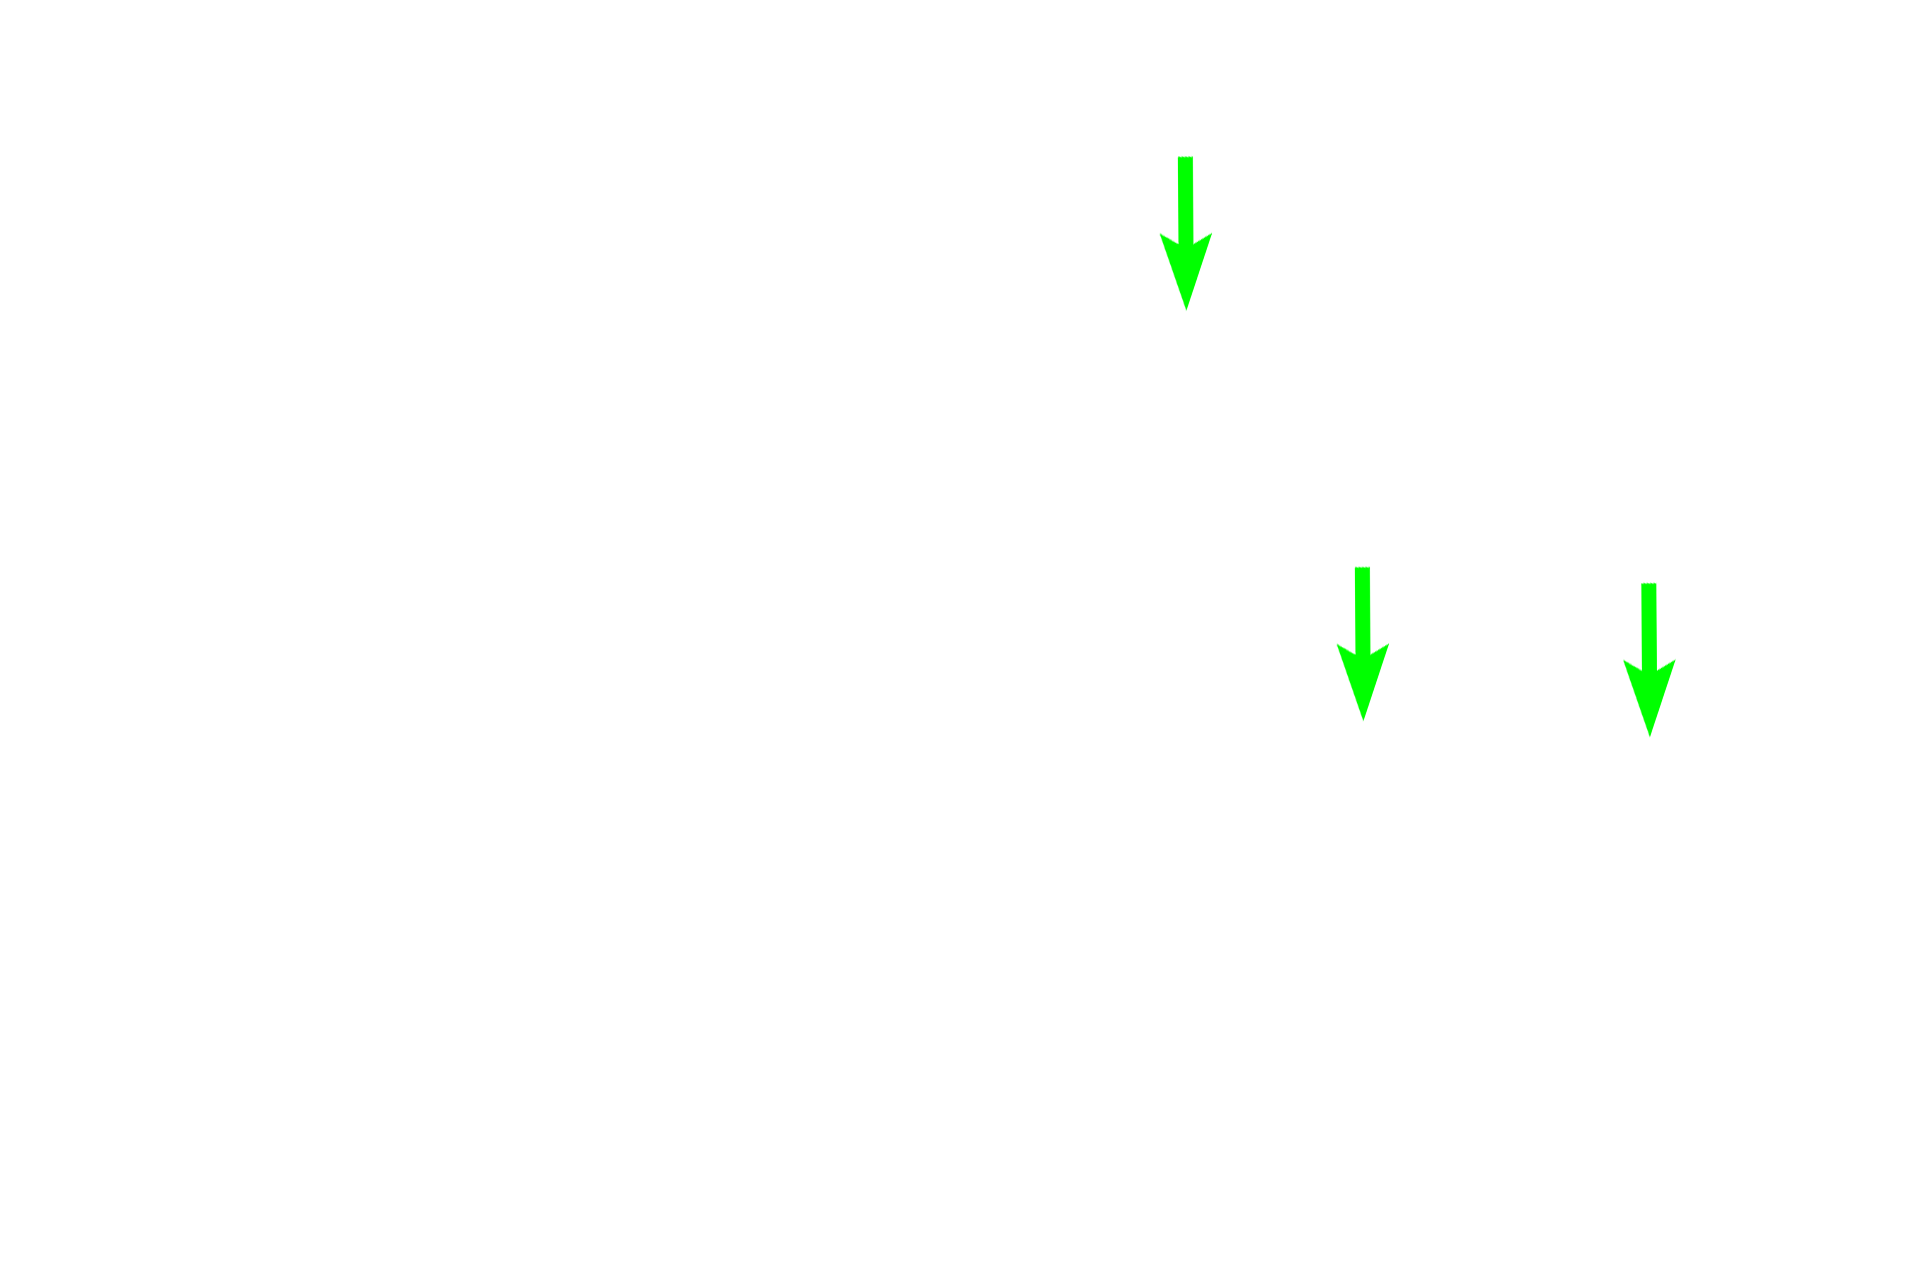  - Secretory granules (mucus) <p>Tubules, as the name indicates, are linear secretory units lined by cuboidal to columnar cells.  A number of tubules in longitudinal and cross section are visible in the image.  Most tubules secrete mucus and the apical region appears frothy or clear because the mucus is easily extracted during tissue processing.  The nuclei are basally located and compressed by the mass of mucus above them.  Tubules have a wide lumen to accommodate the thick, mucus secretion.</p>
